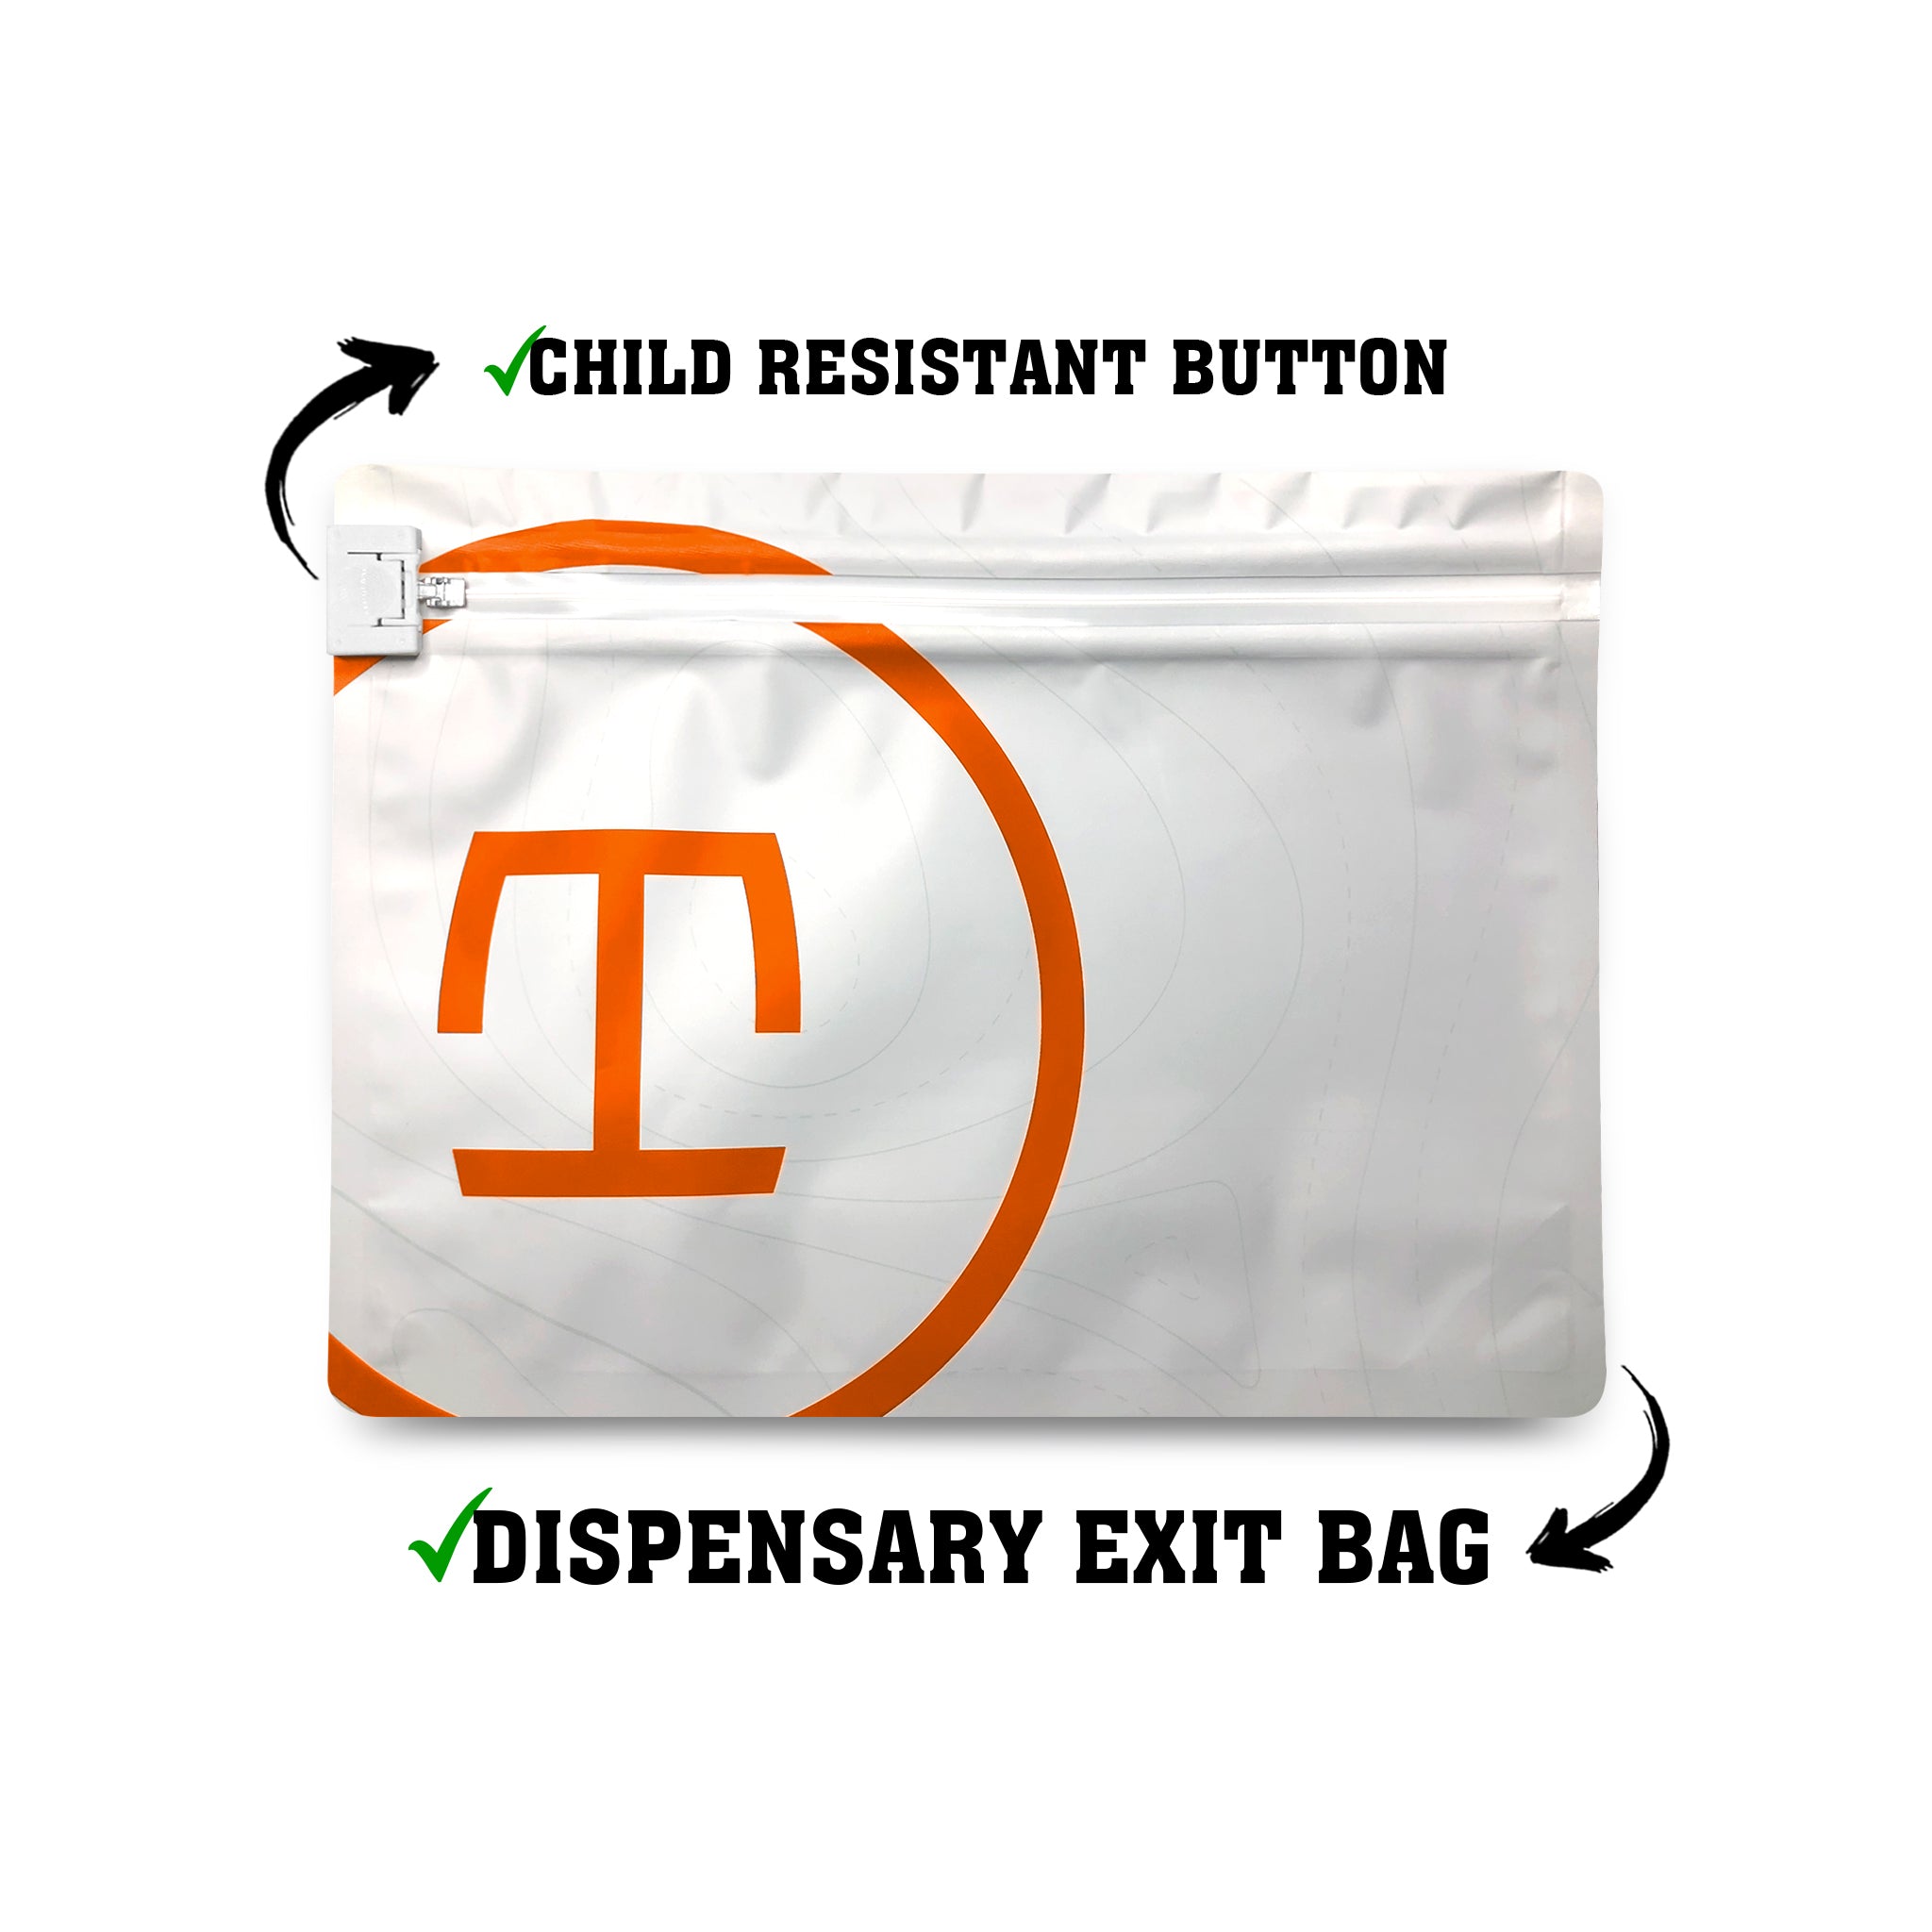 Custom Exit Bag with Male and Female Lock